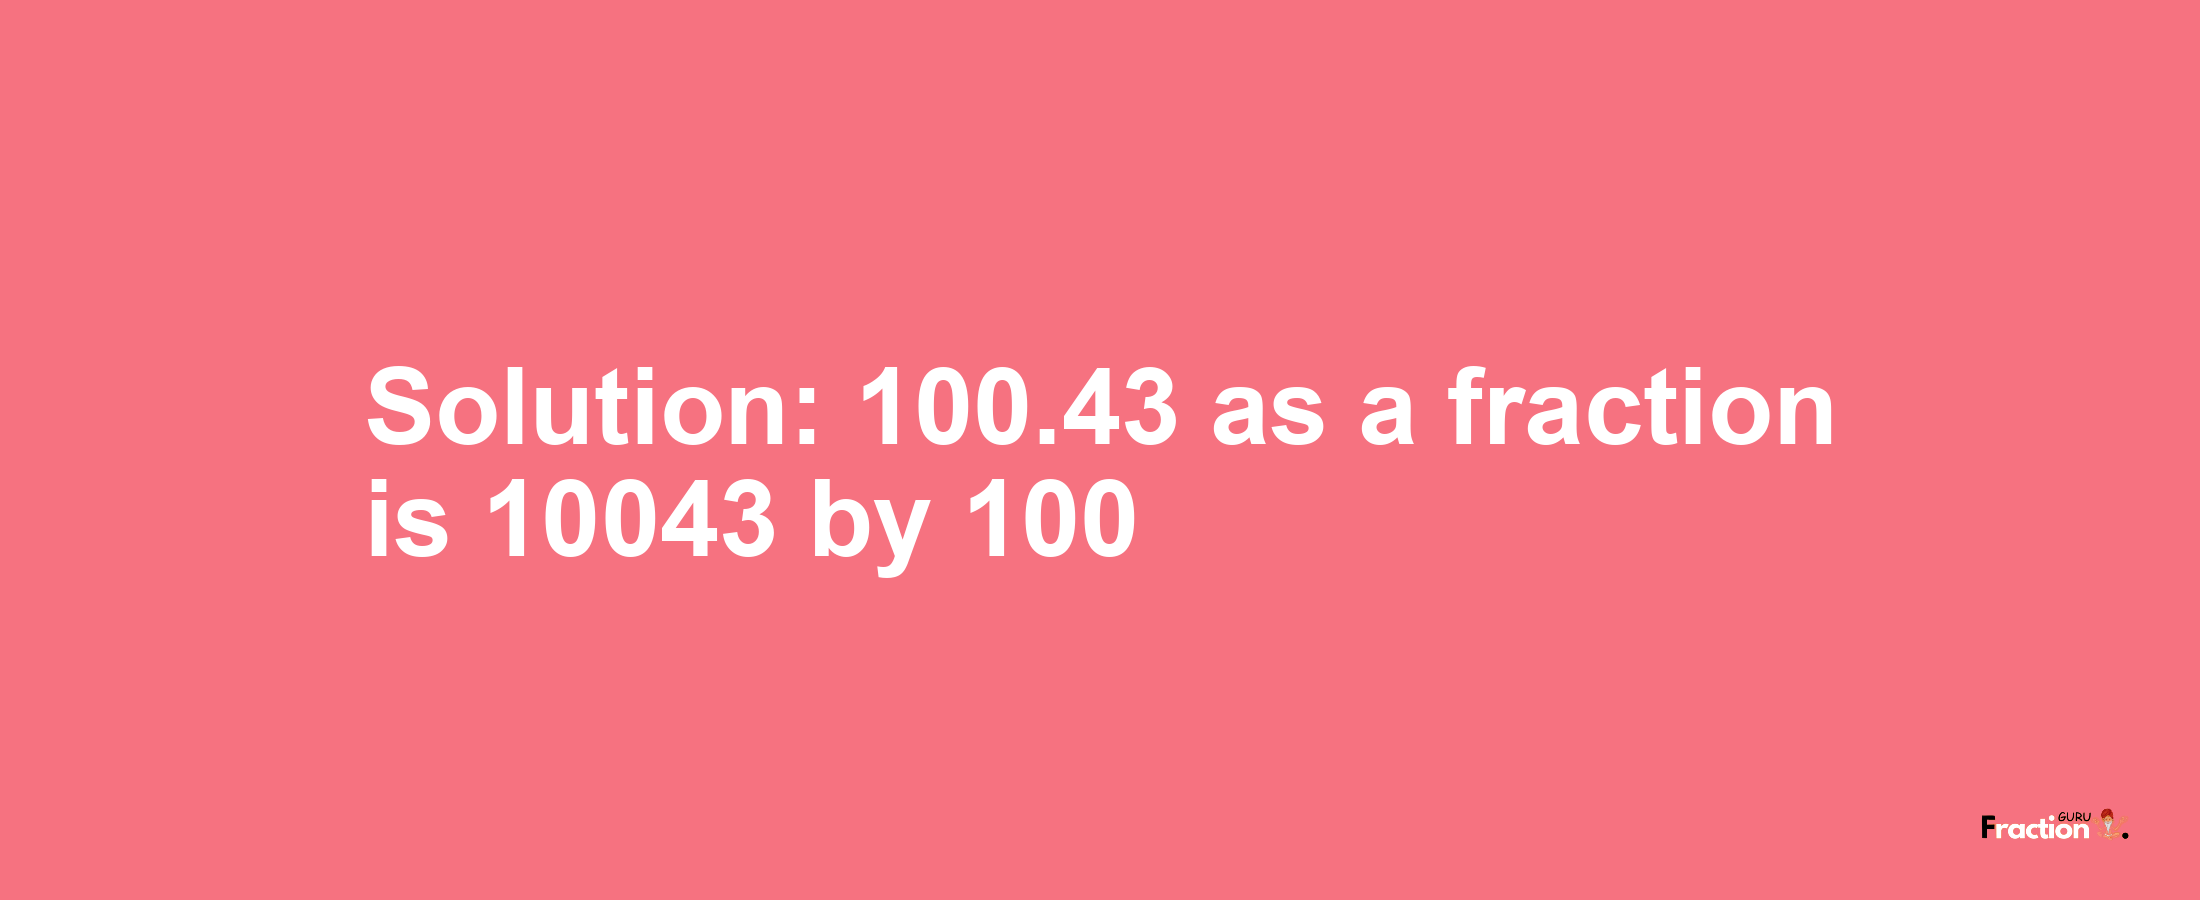 Solution:100.43 as a fraction is 10043/100